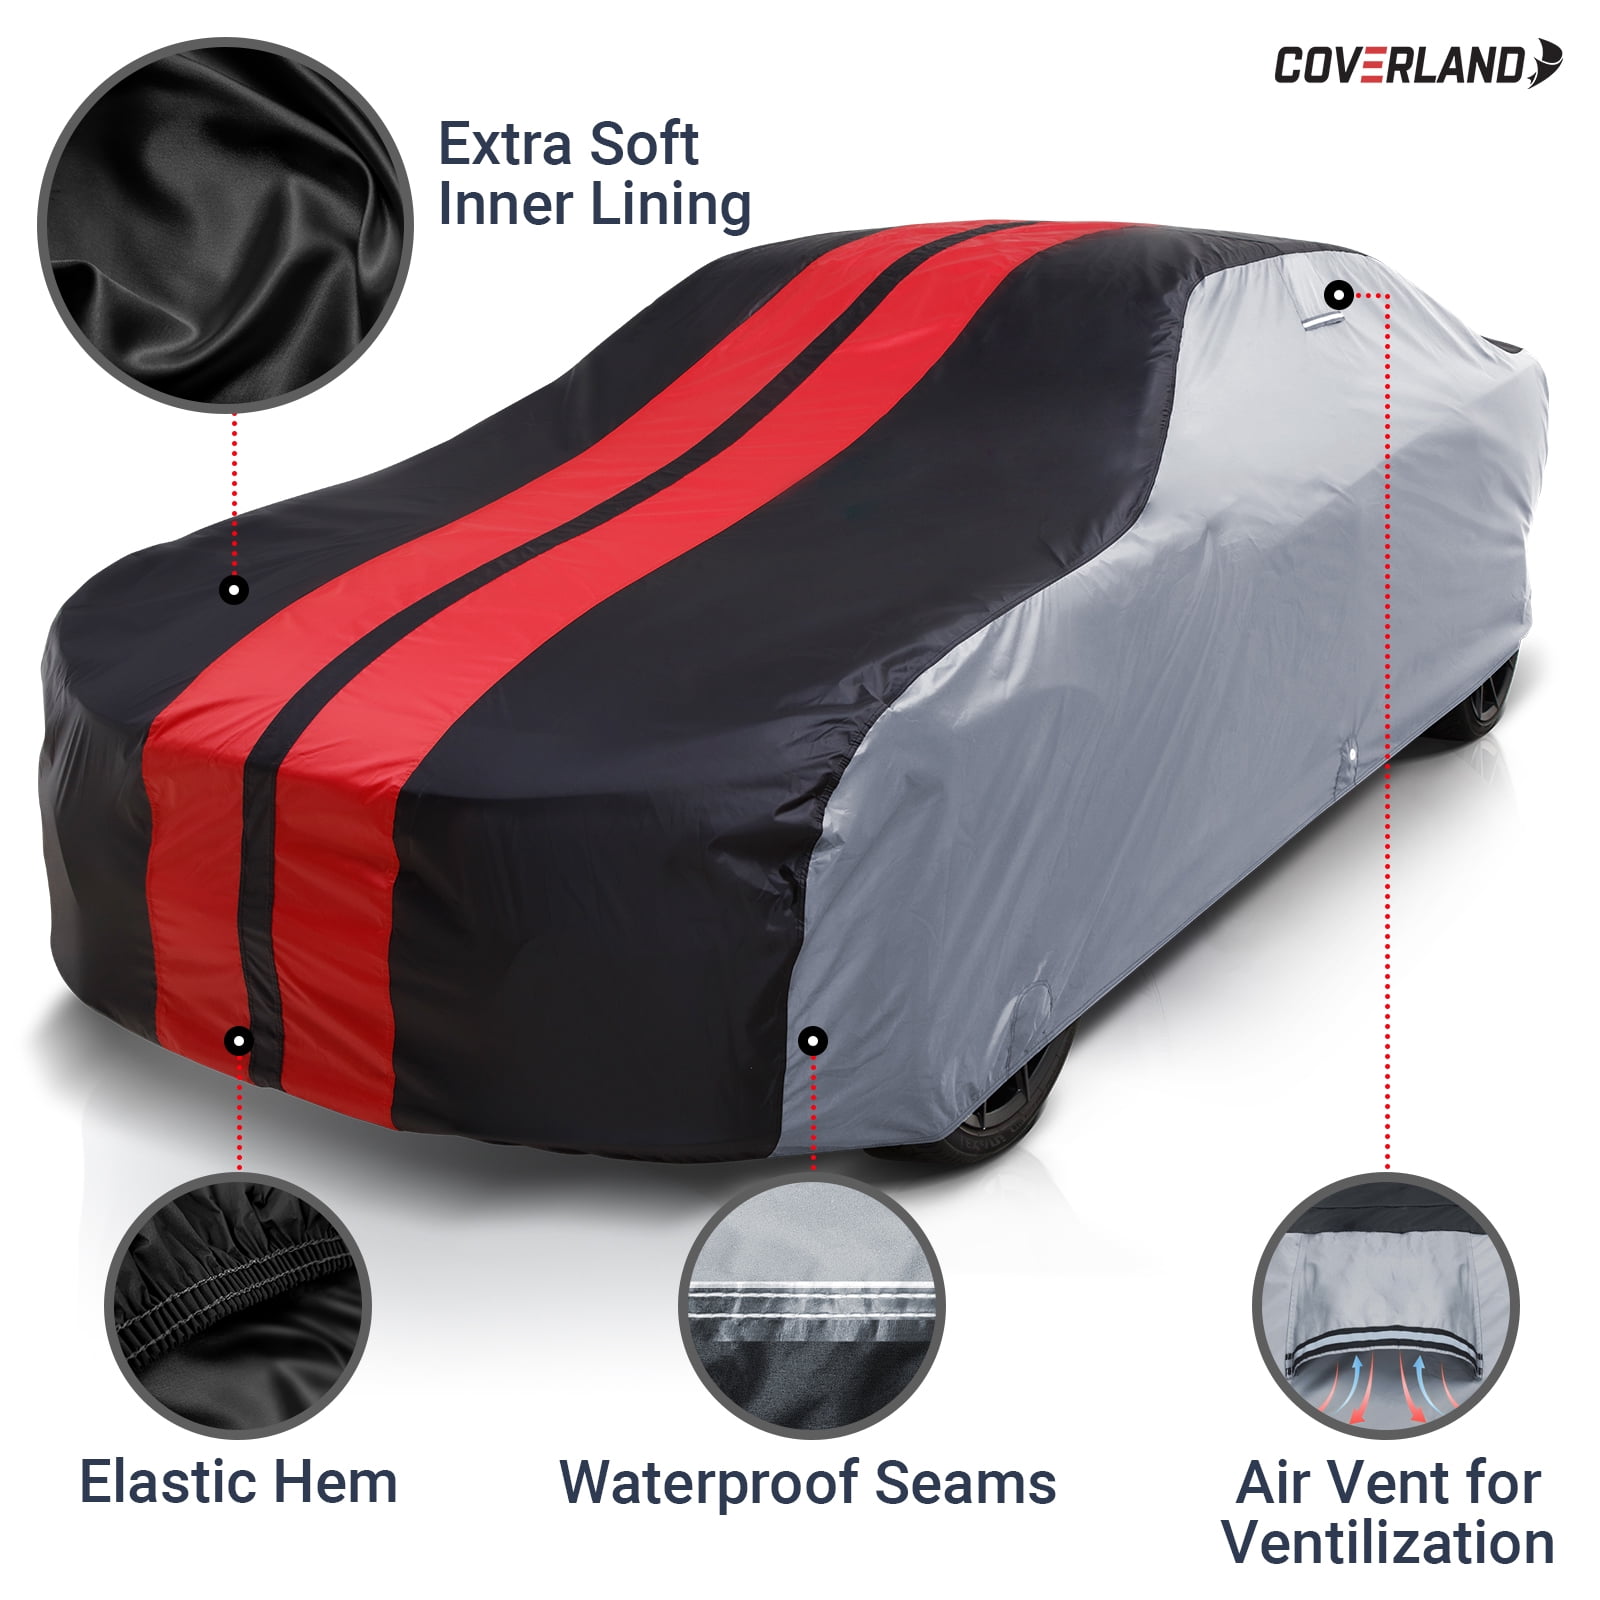 iCarCover Fits: [Ferrari 400i] 1979-1984 Premium Full Car Cover Waterproof All Weather Resistant Custom Outdoor Indoor Sun Snow Storm Protection Fo